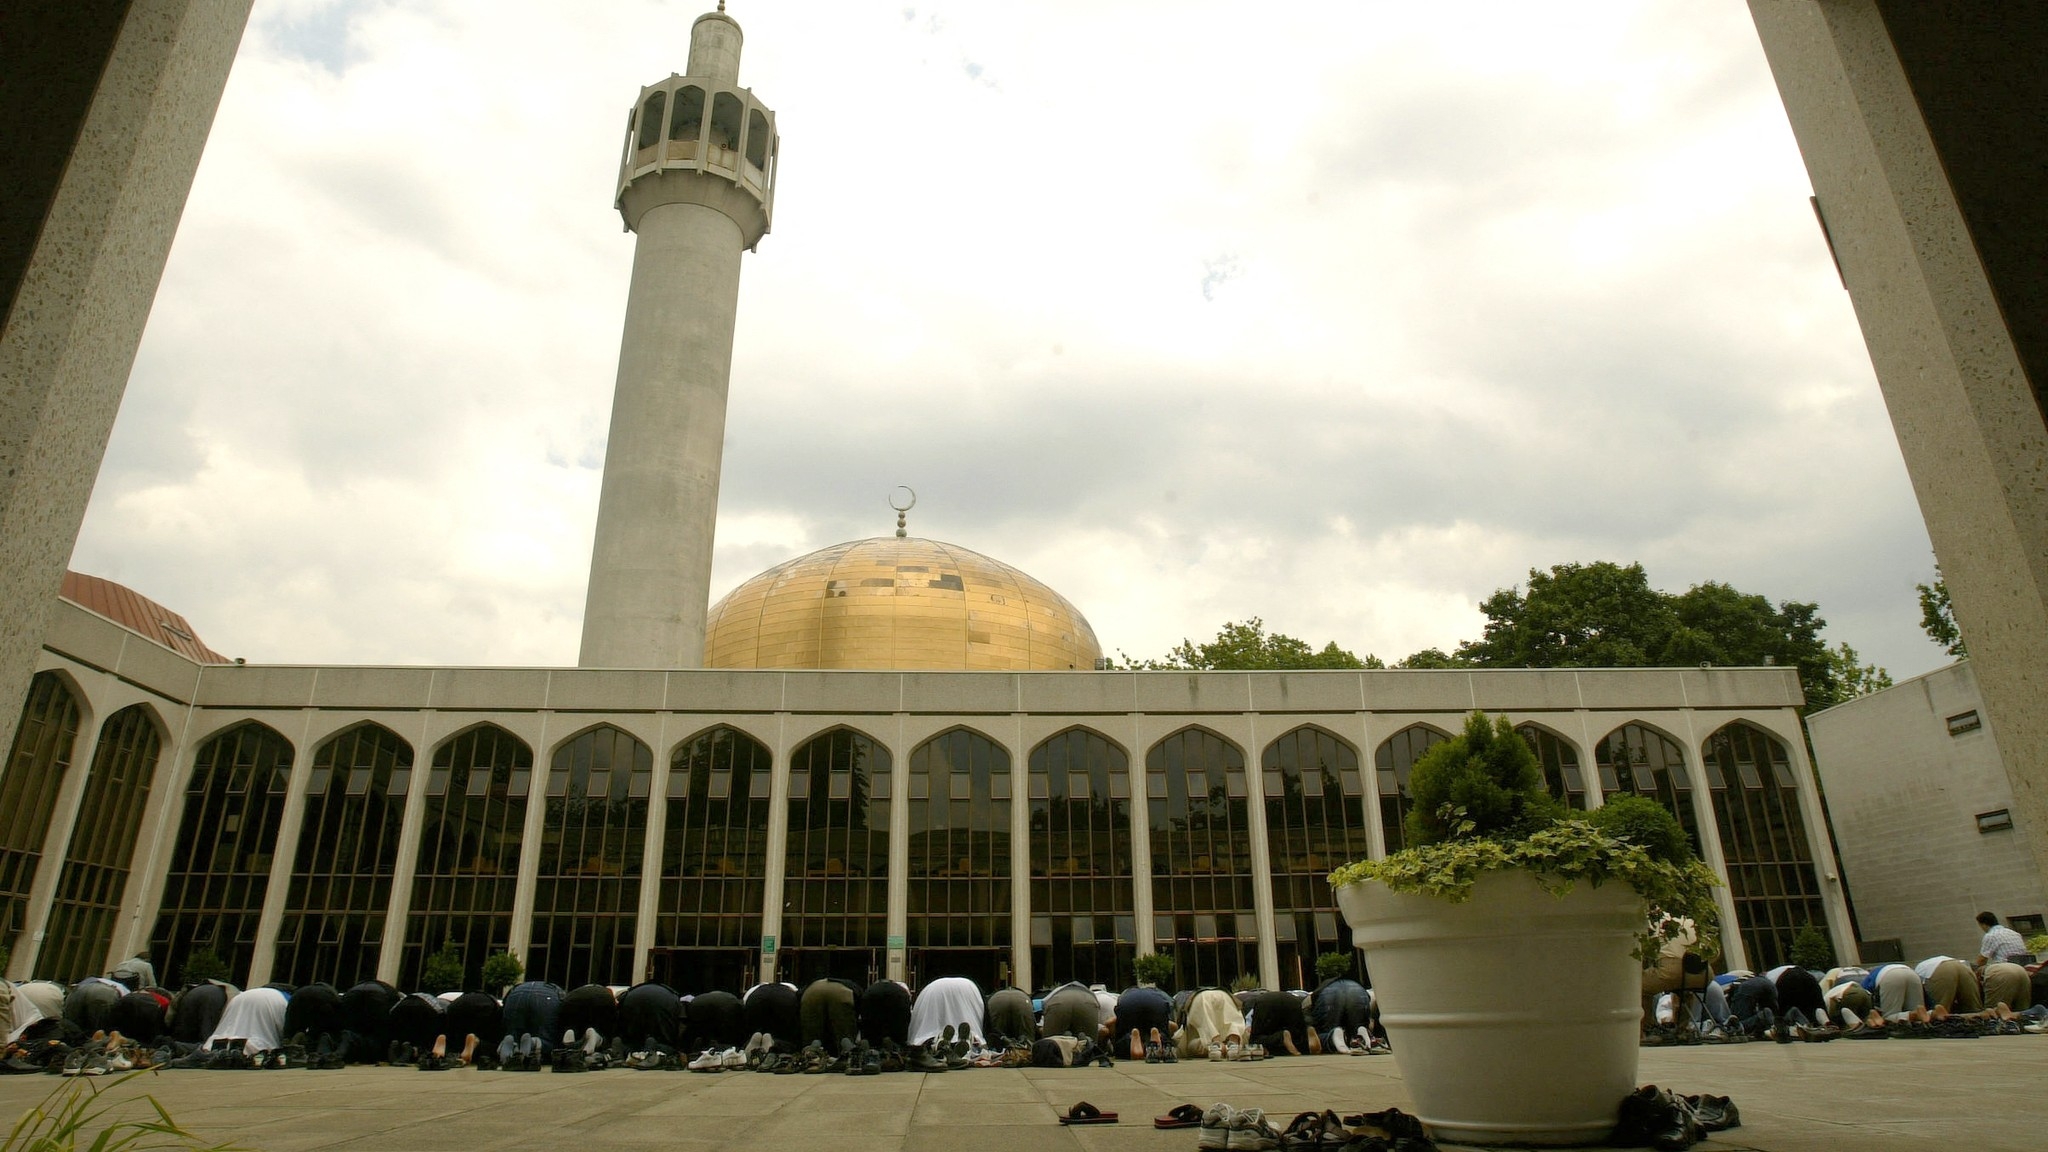 Muslims kneel at London's Central Mosque in Regents Park during Friday's prayers on 15 July 2005 (AFP/Carl de Souza)